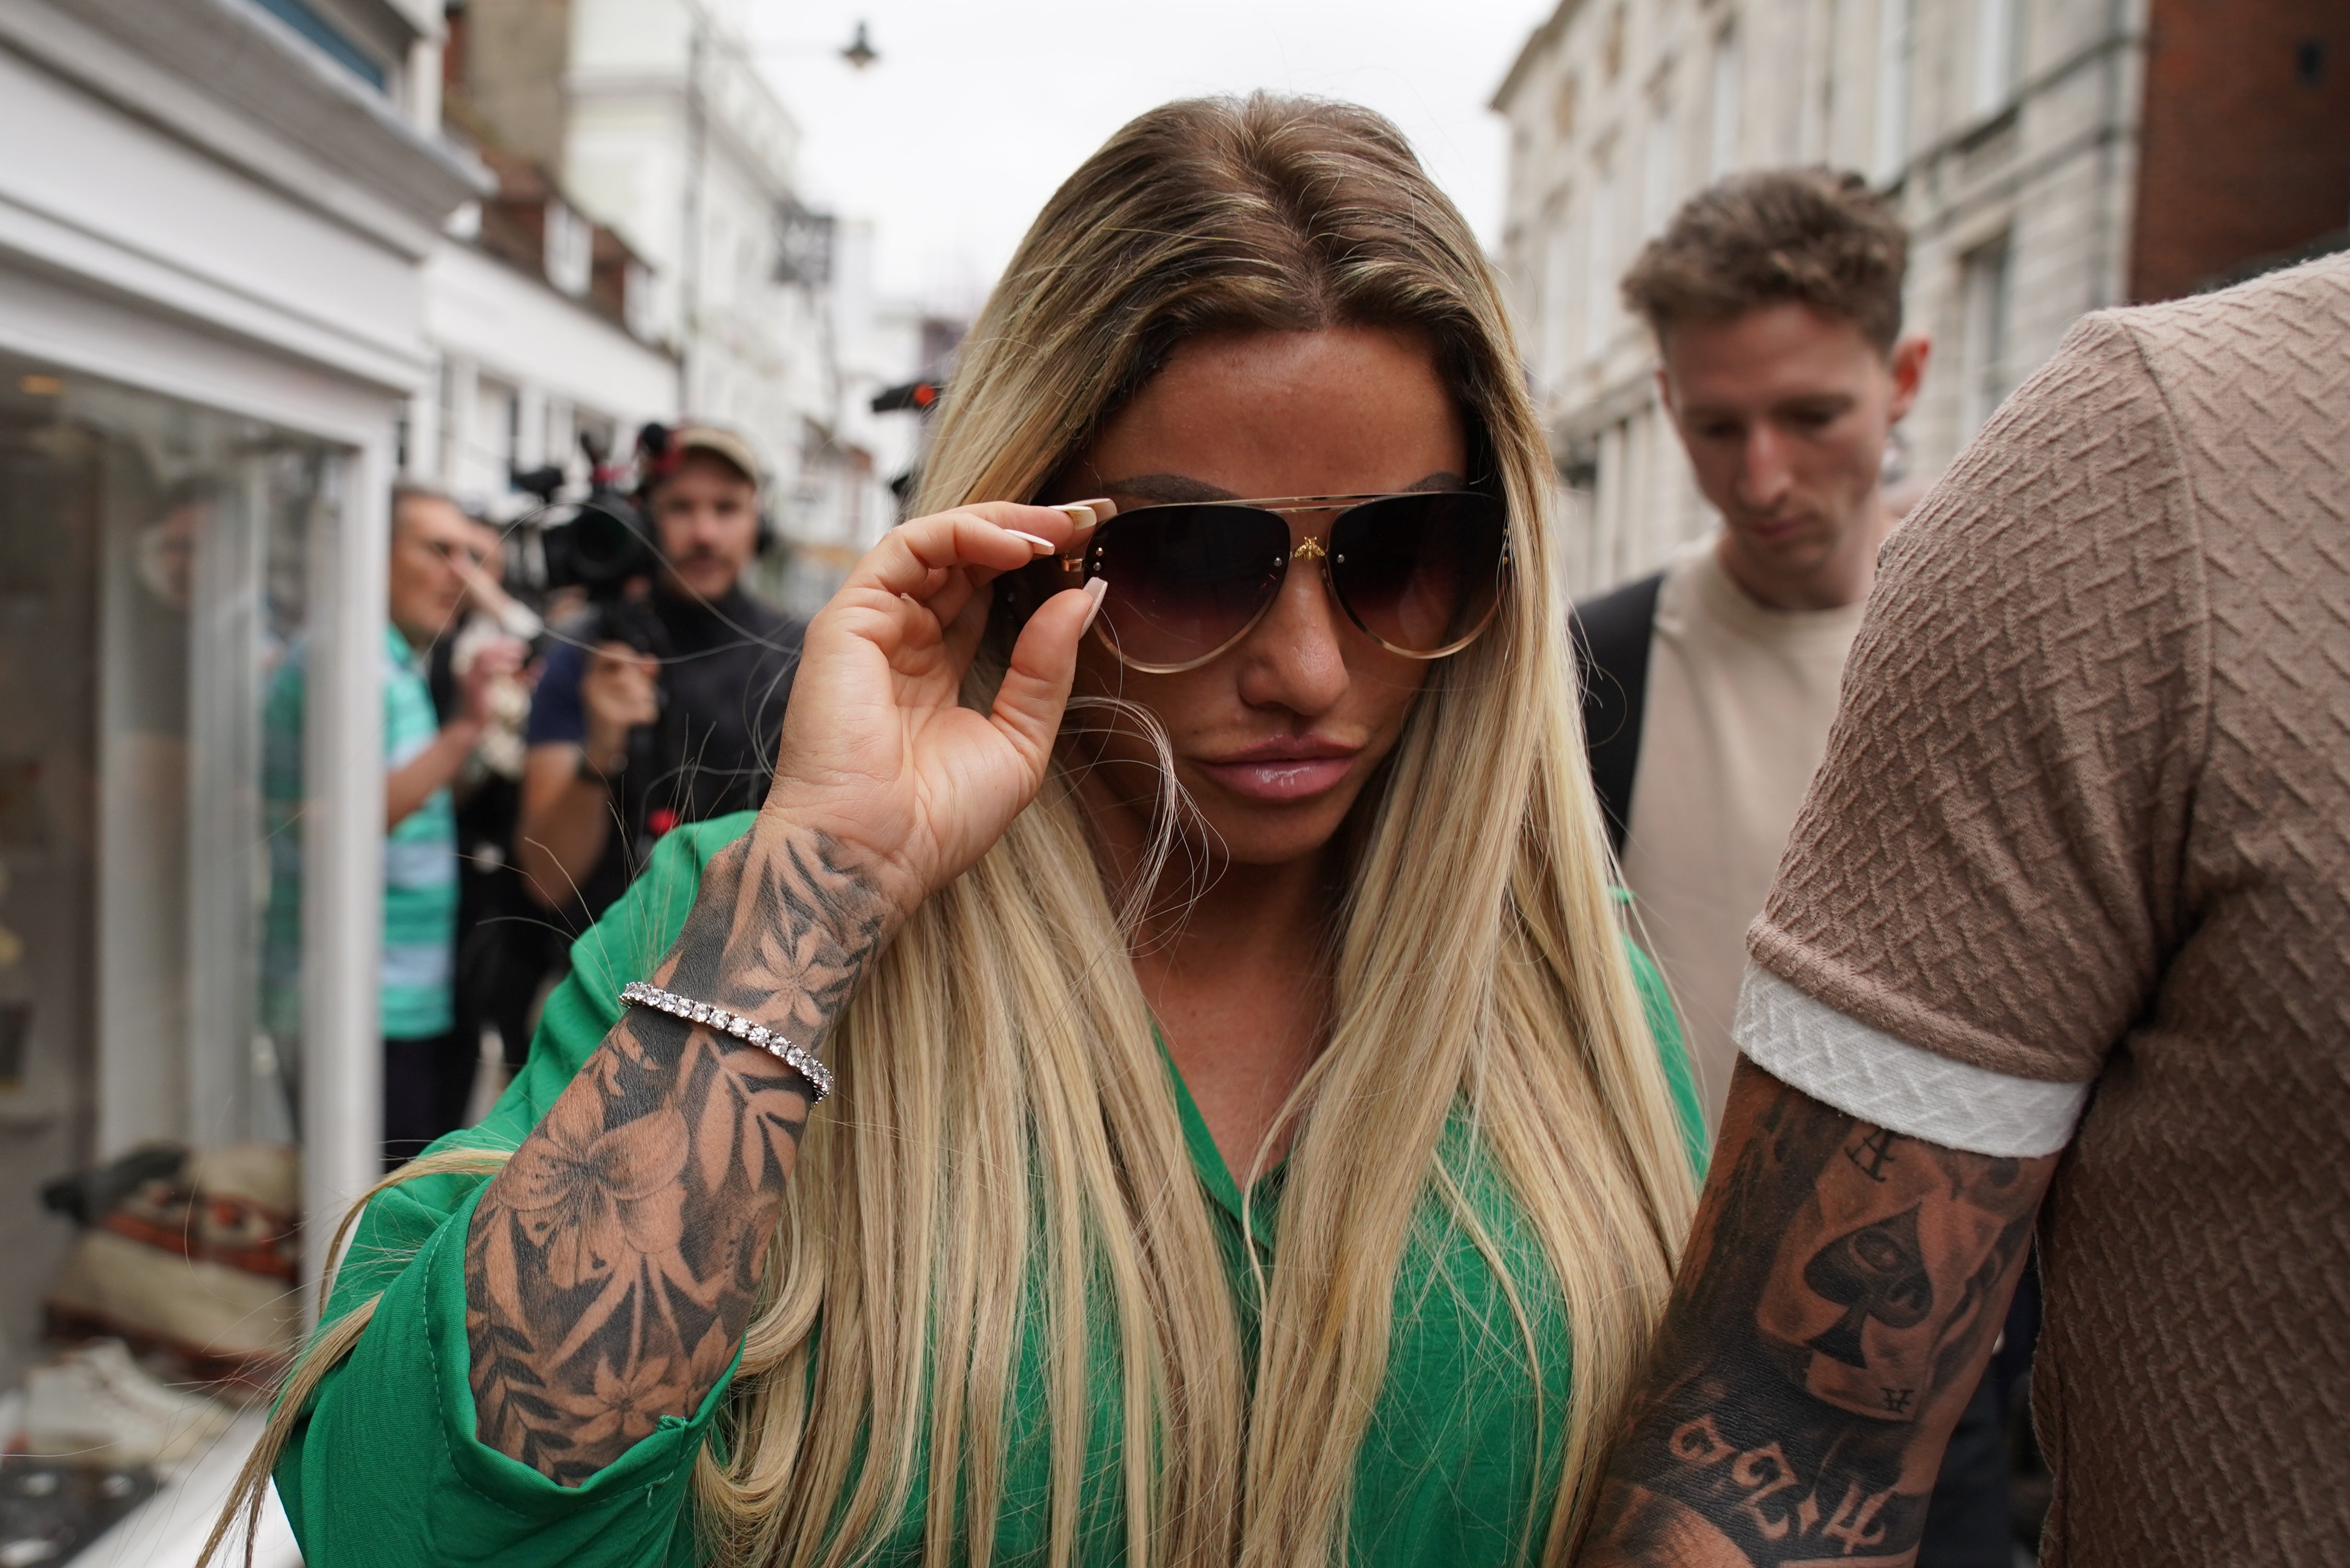 Katie Price has been declared bankrupt for a second time